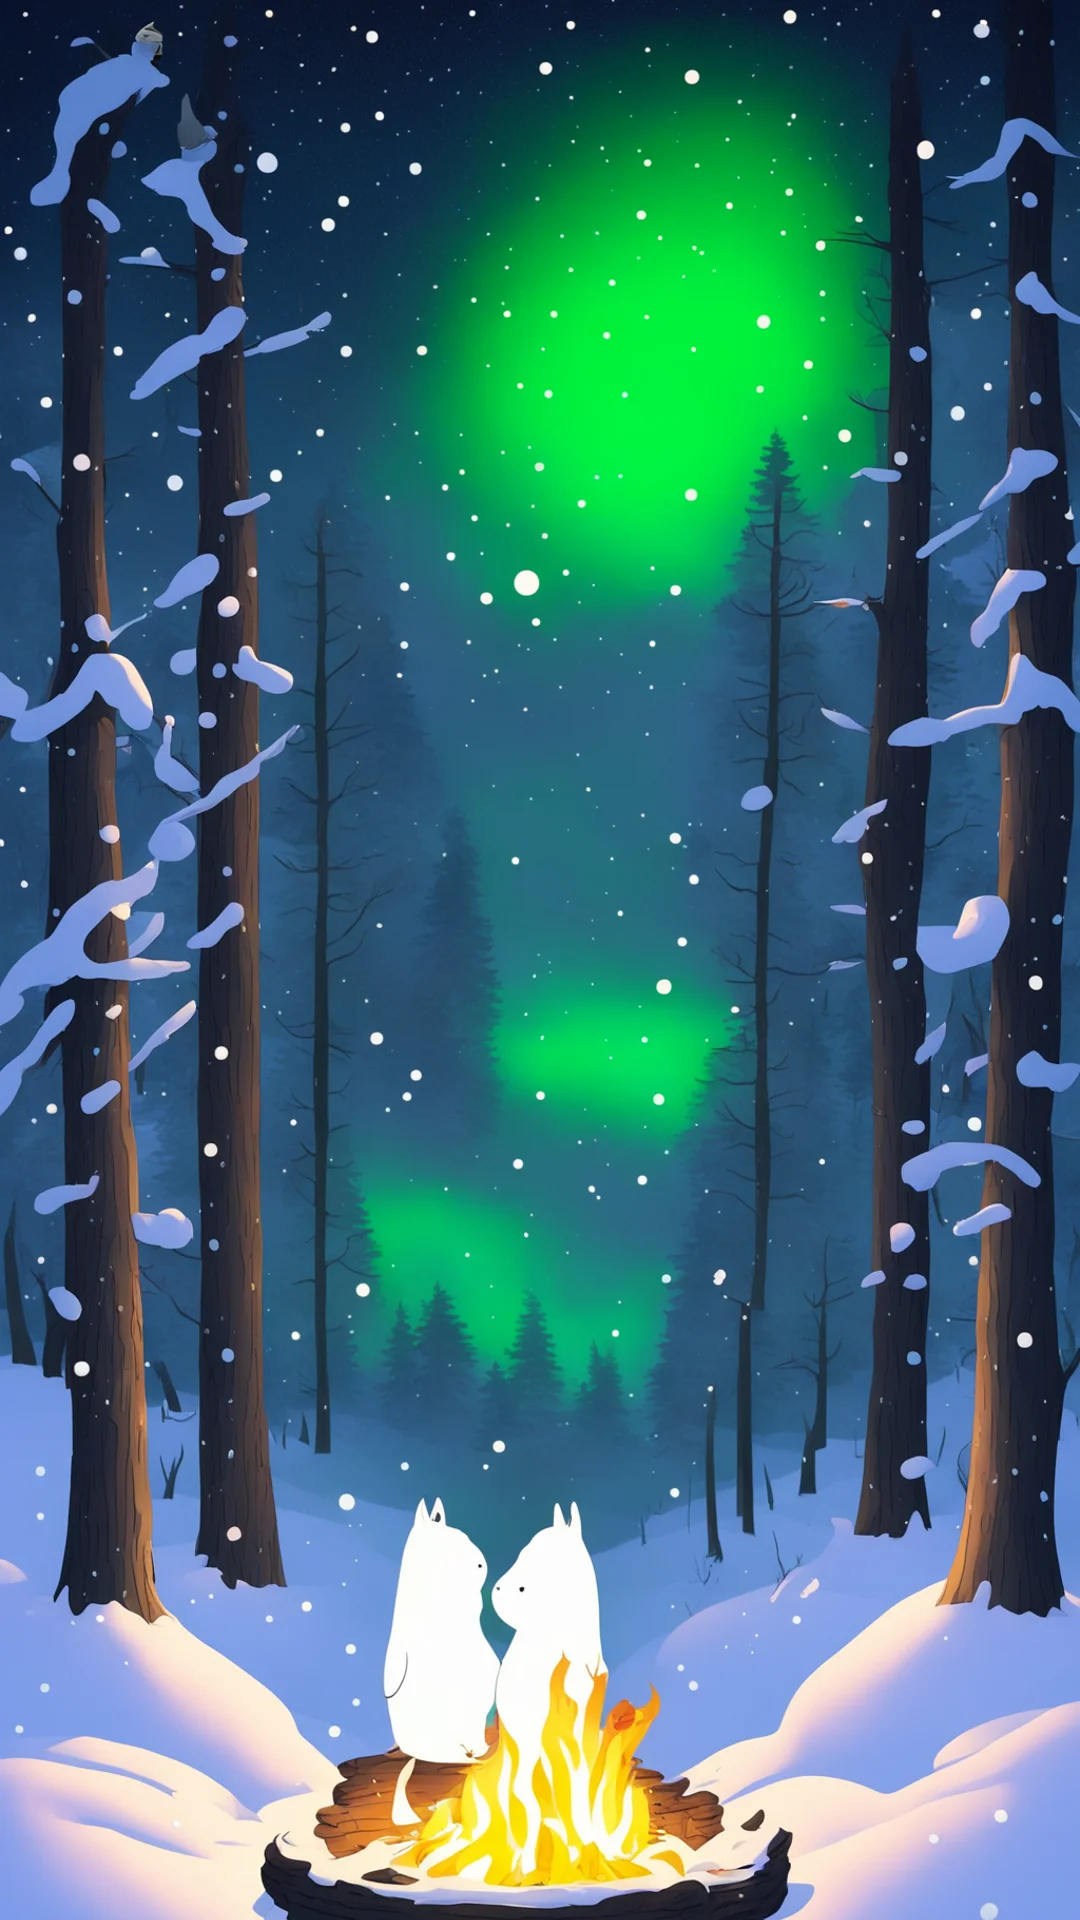 moomintroll and snorkmaiden on a snowy night in the forest by a campfire hugging and looking at the aurora and stars amazing awesome portrait 2 tall